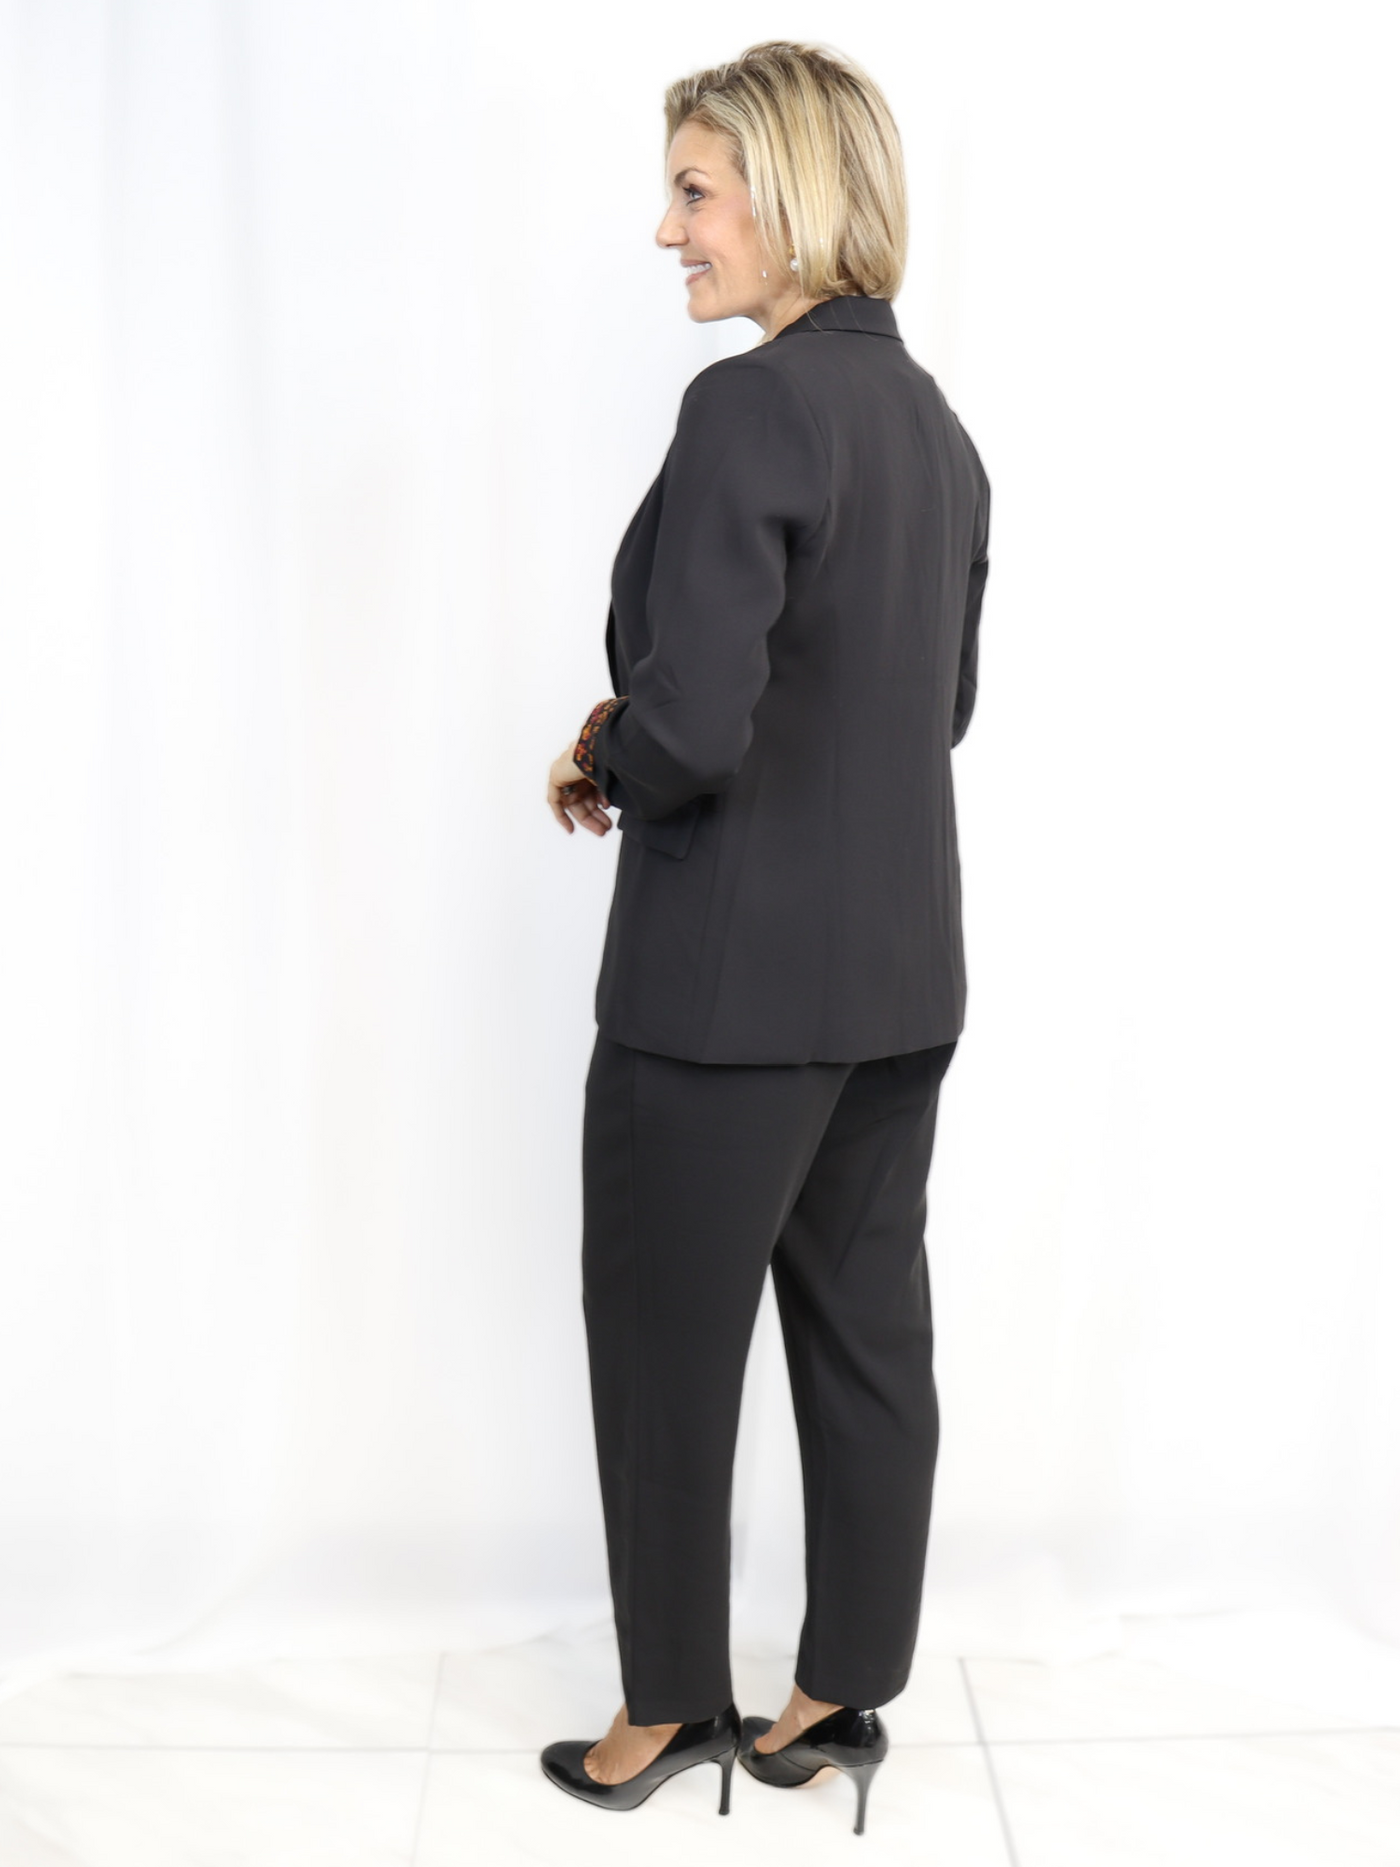 Classic Tapered Dress Pants back view with Classic blazer.